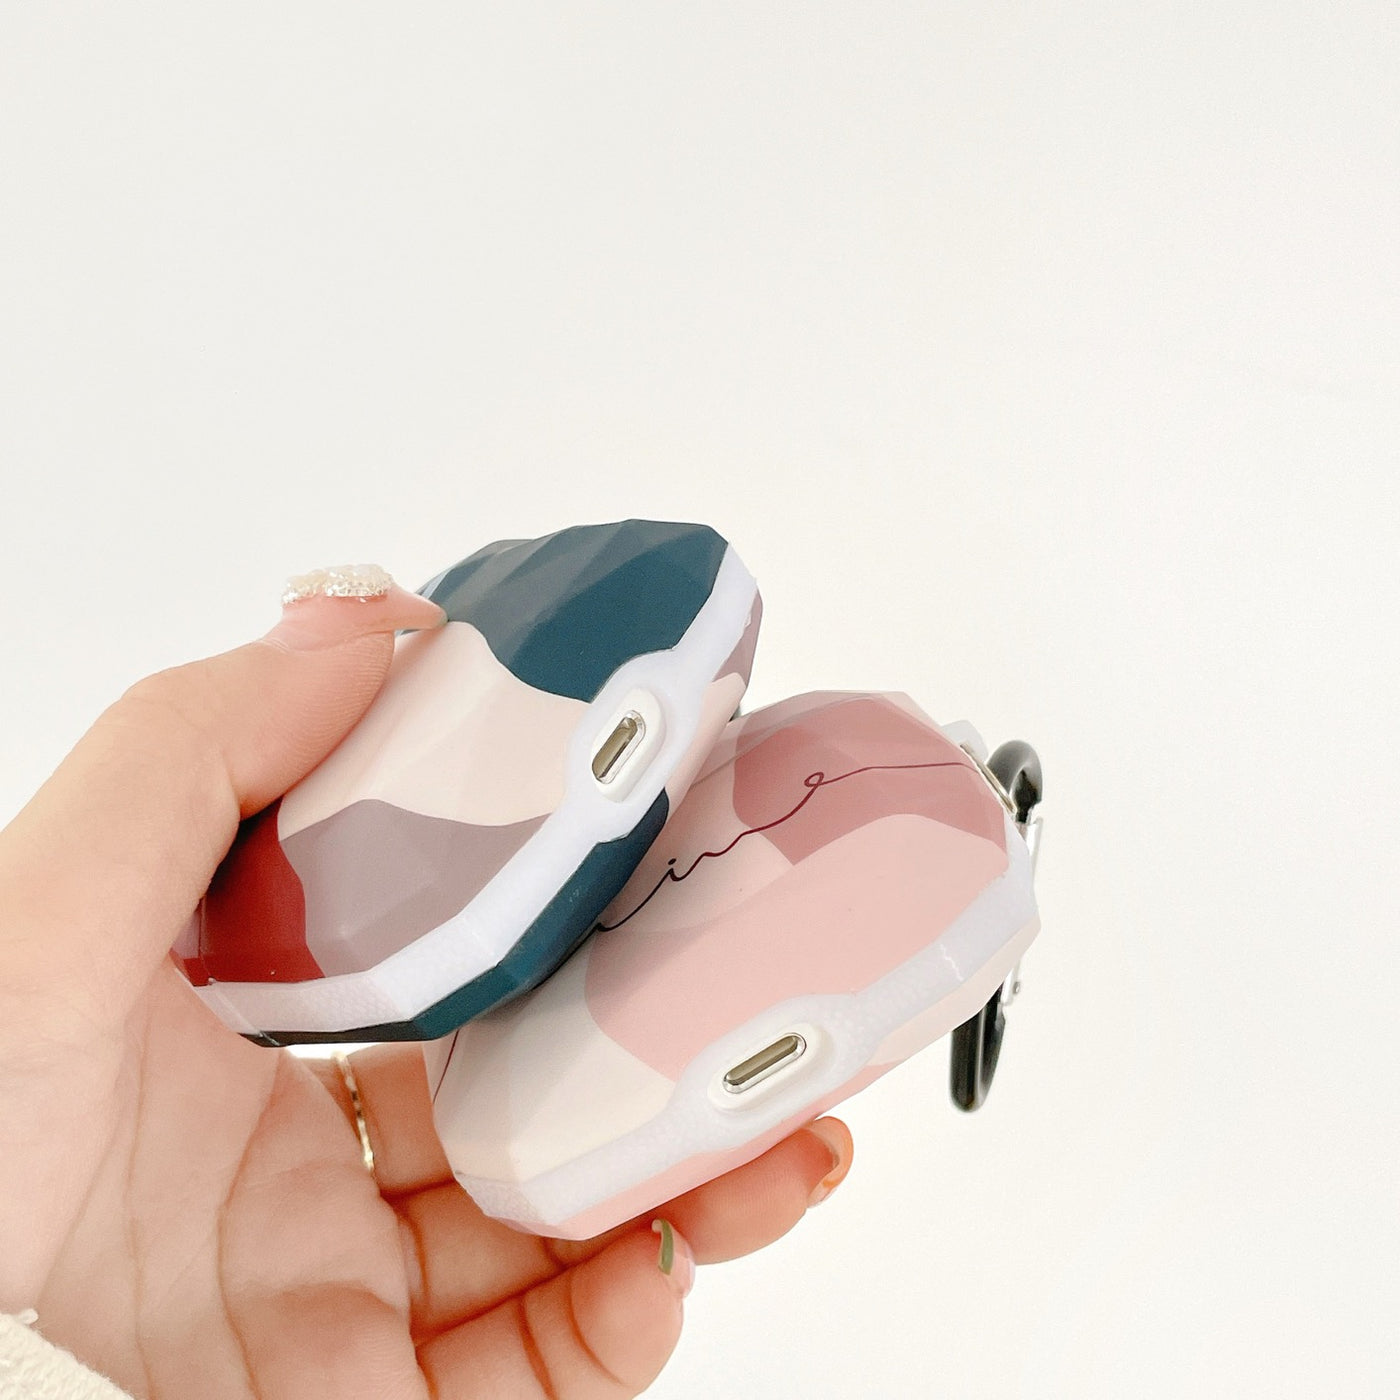 【Airpods Case】かわいい石柄Airpods/ AirPods Proケース